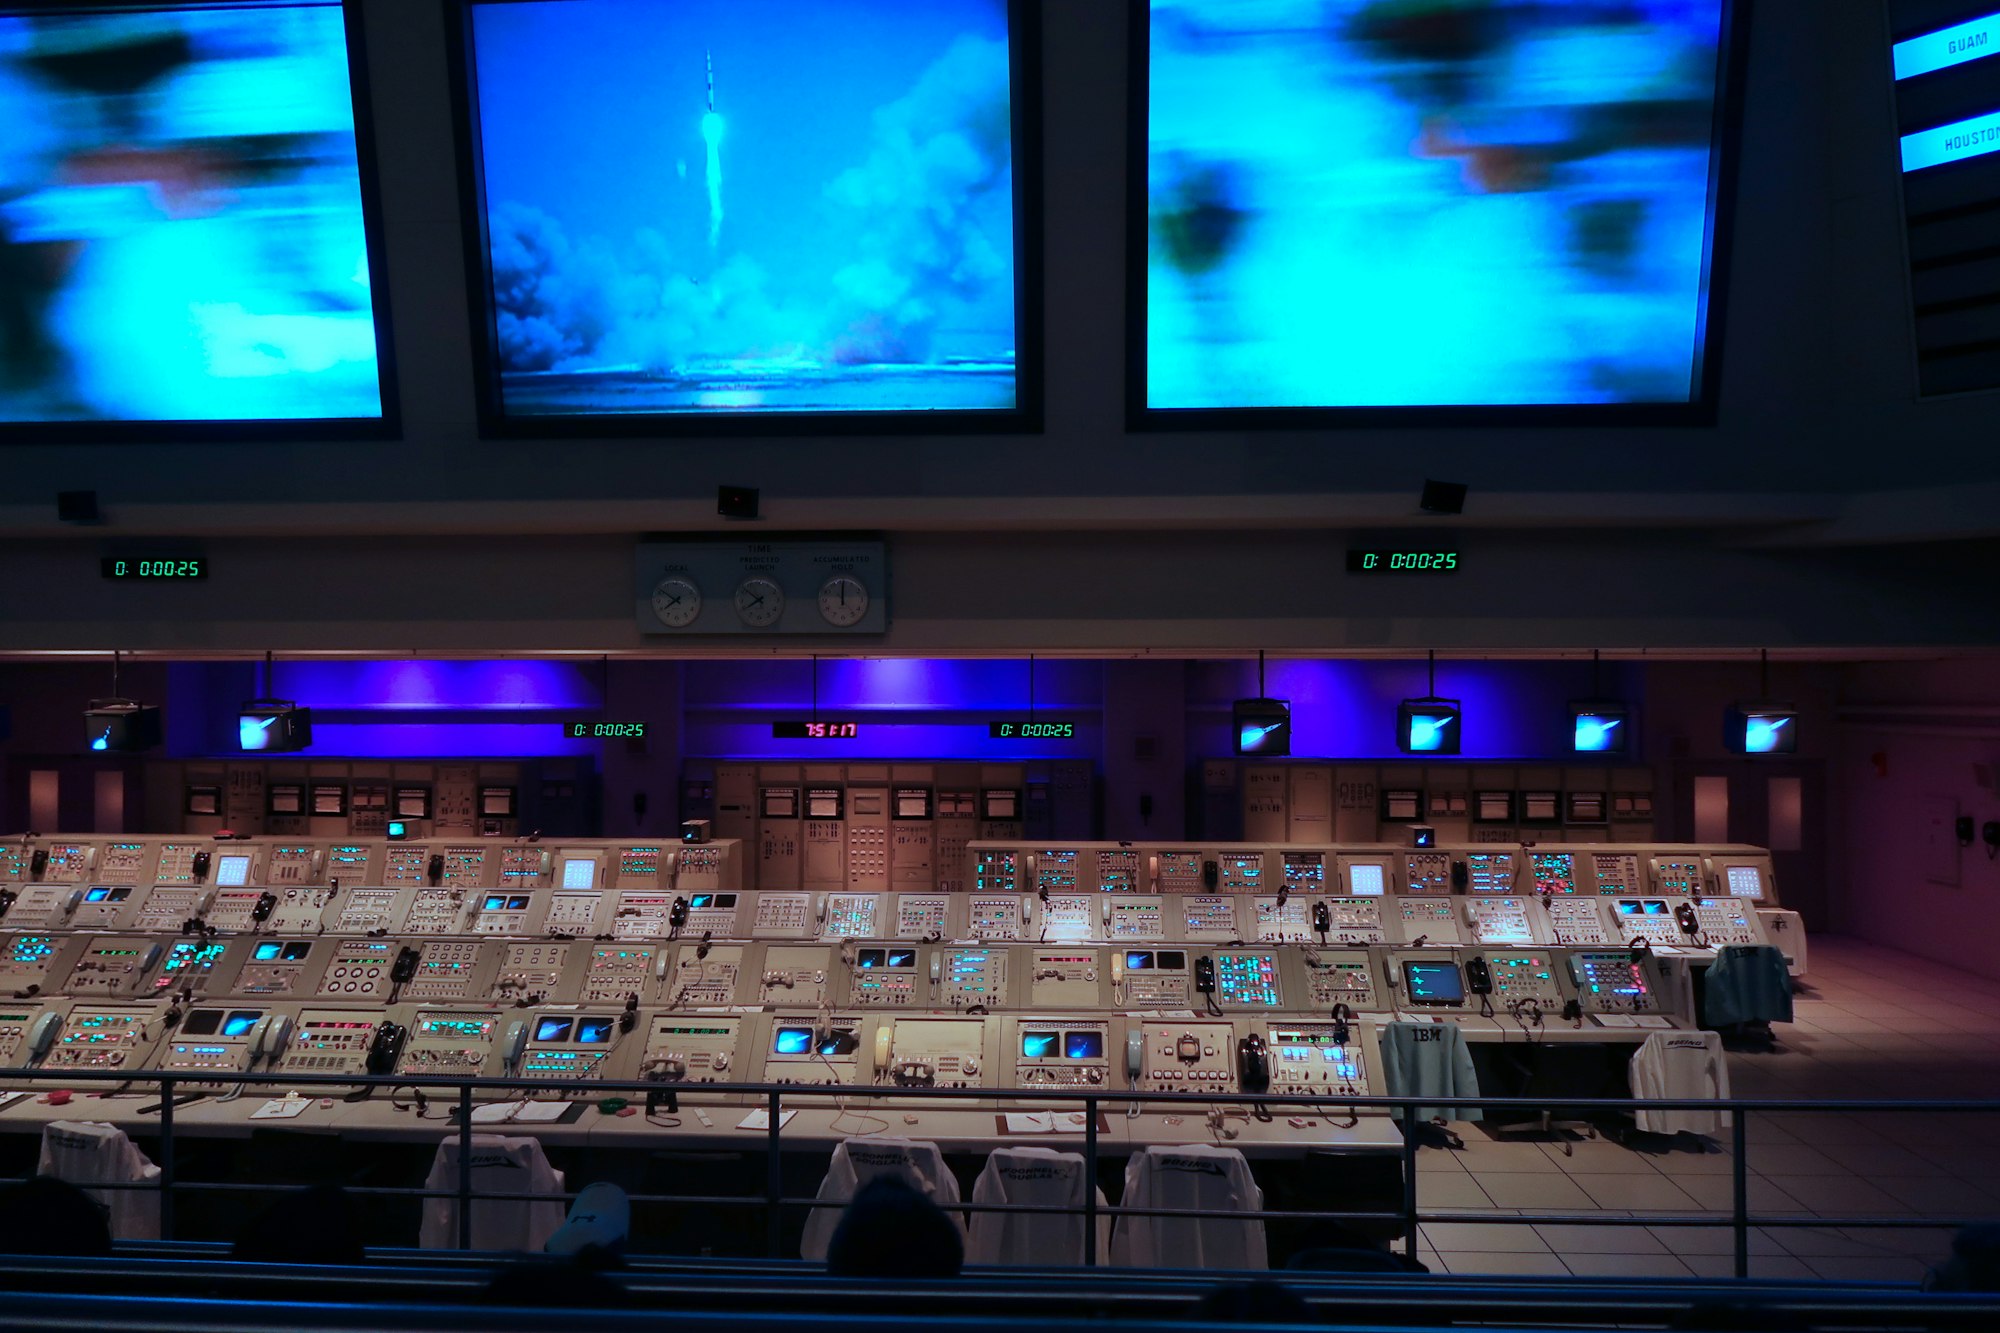 Operational tools in a mission control. 